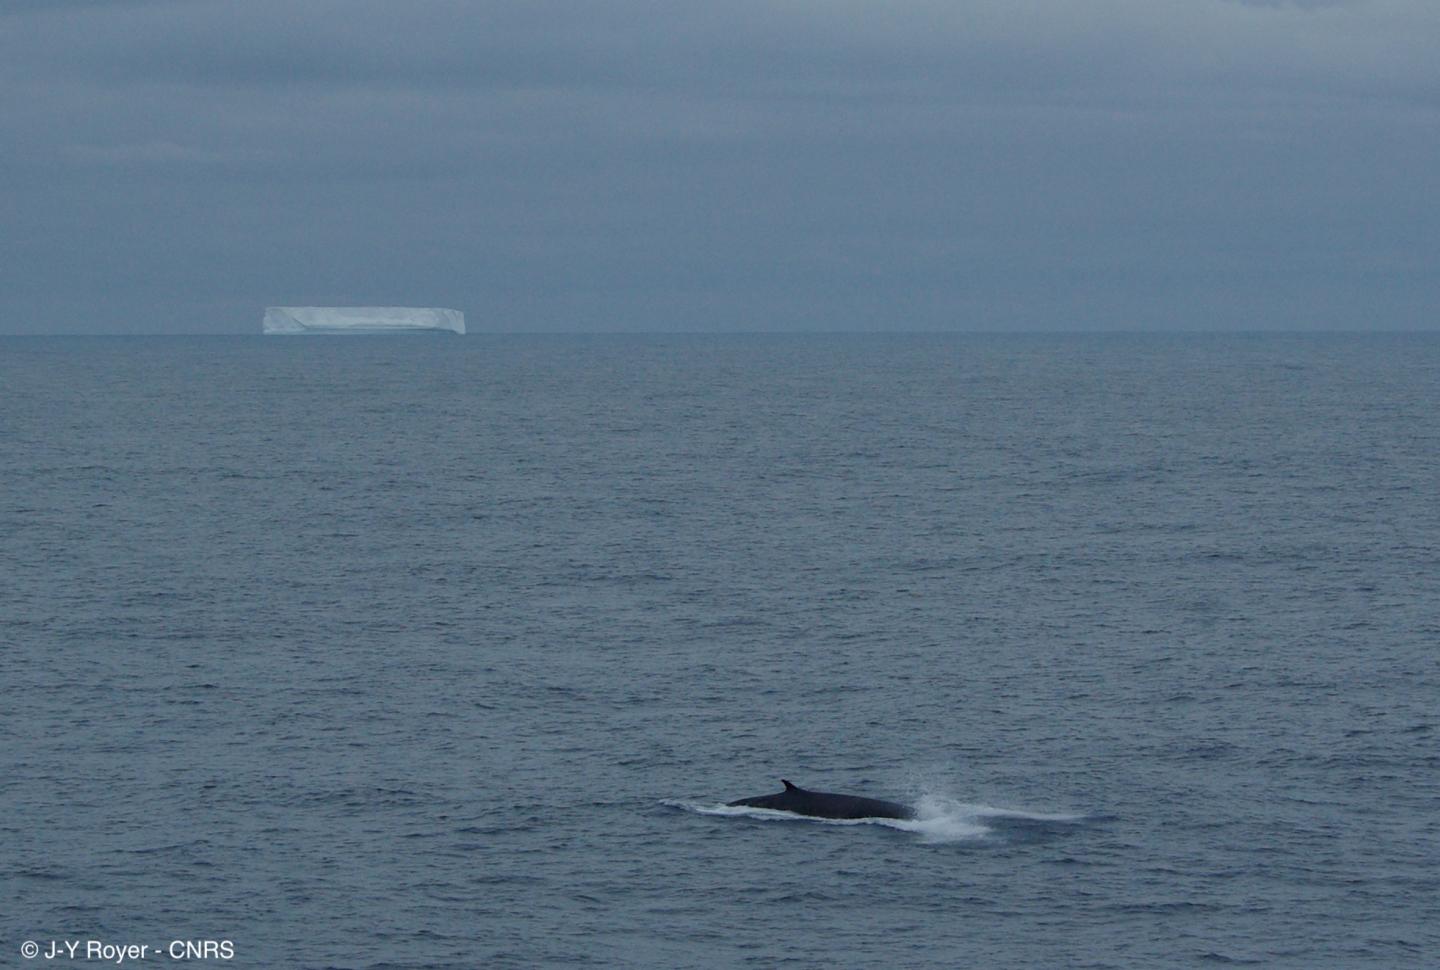 Fin Whale and Iceberg, Southern Indian Ocean